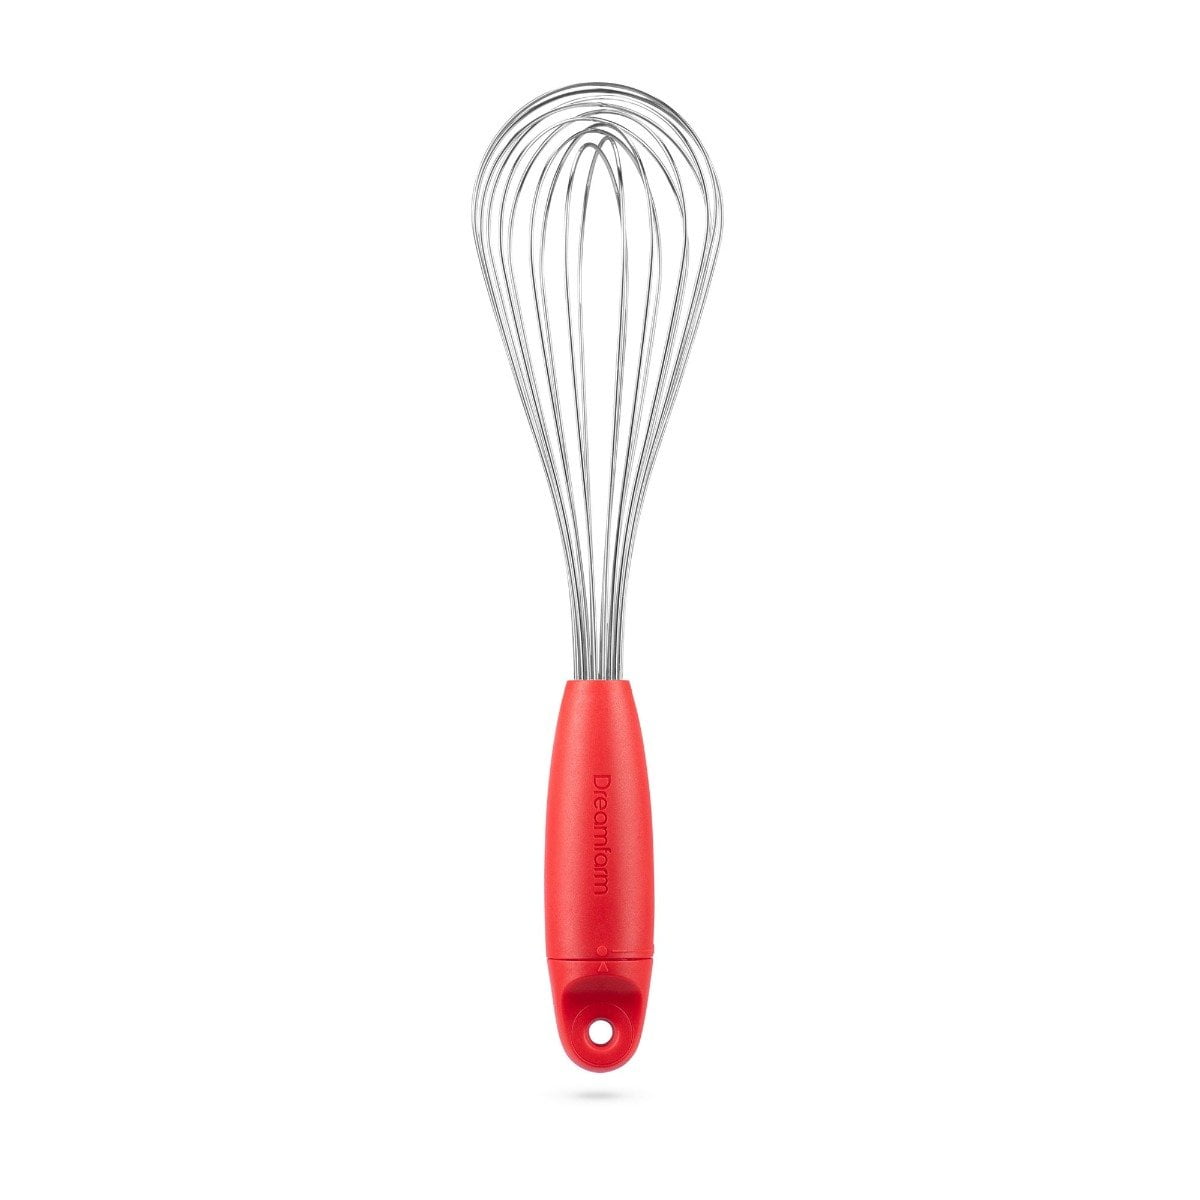 Quirky Bloom - Retractable Whisk